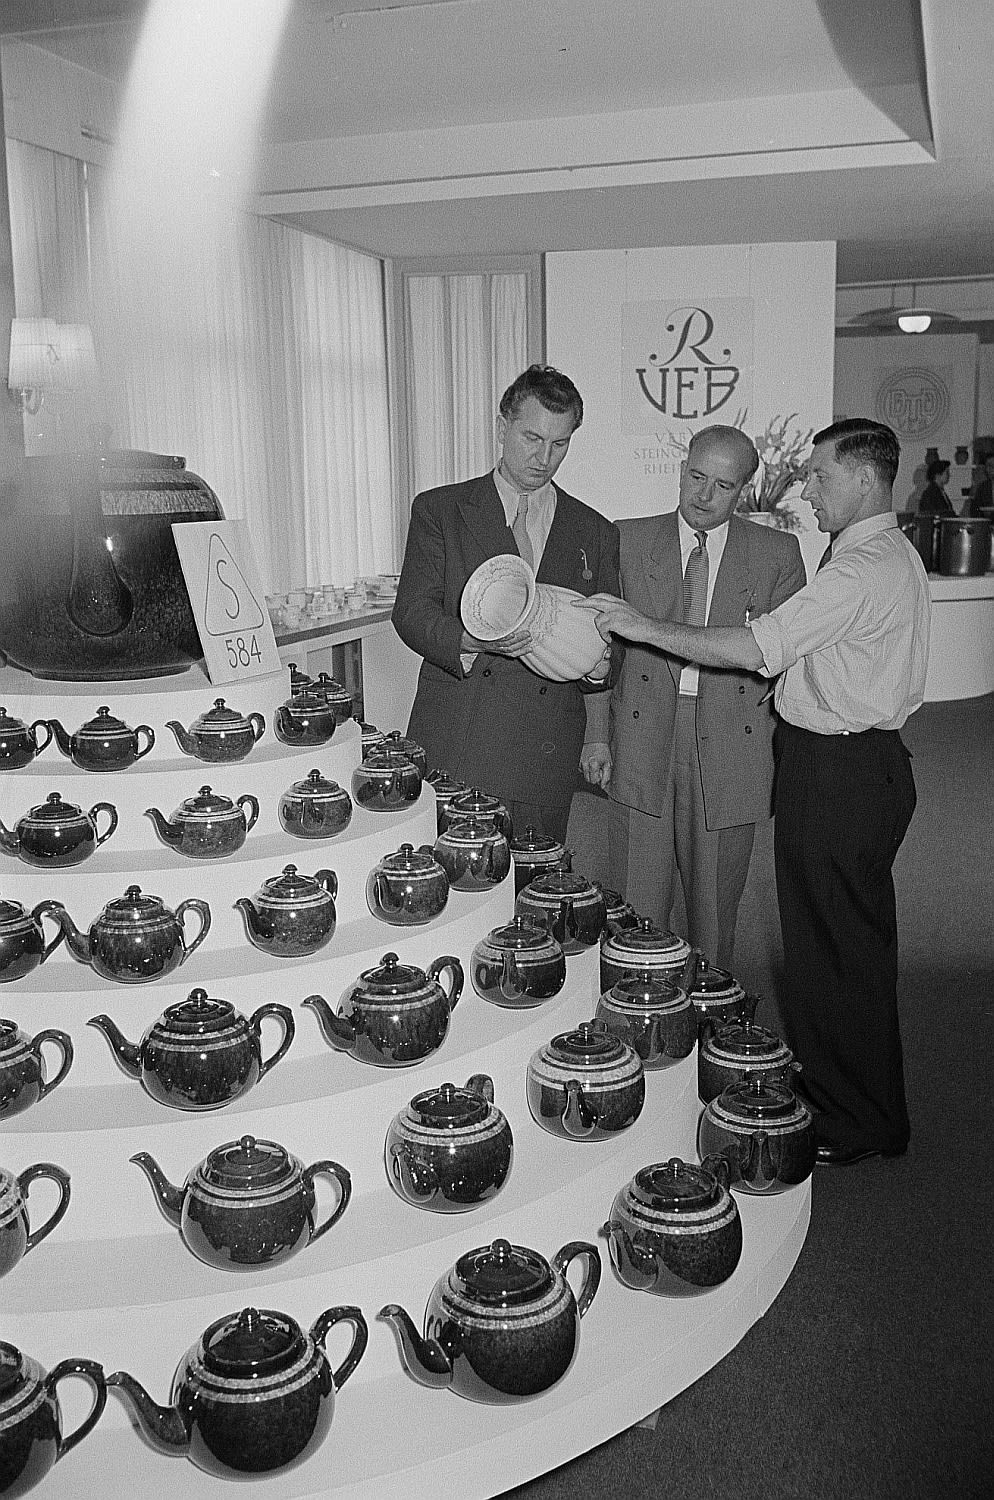 three men admire earthenware, standing in front of a table with dozens of versions of the same teapot placed down next to each other.